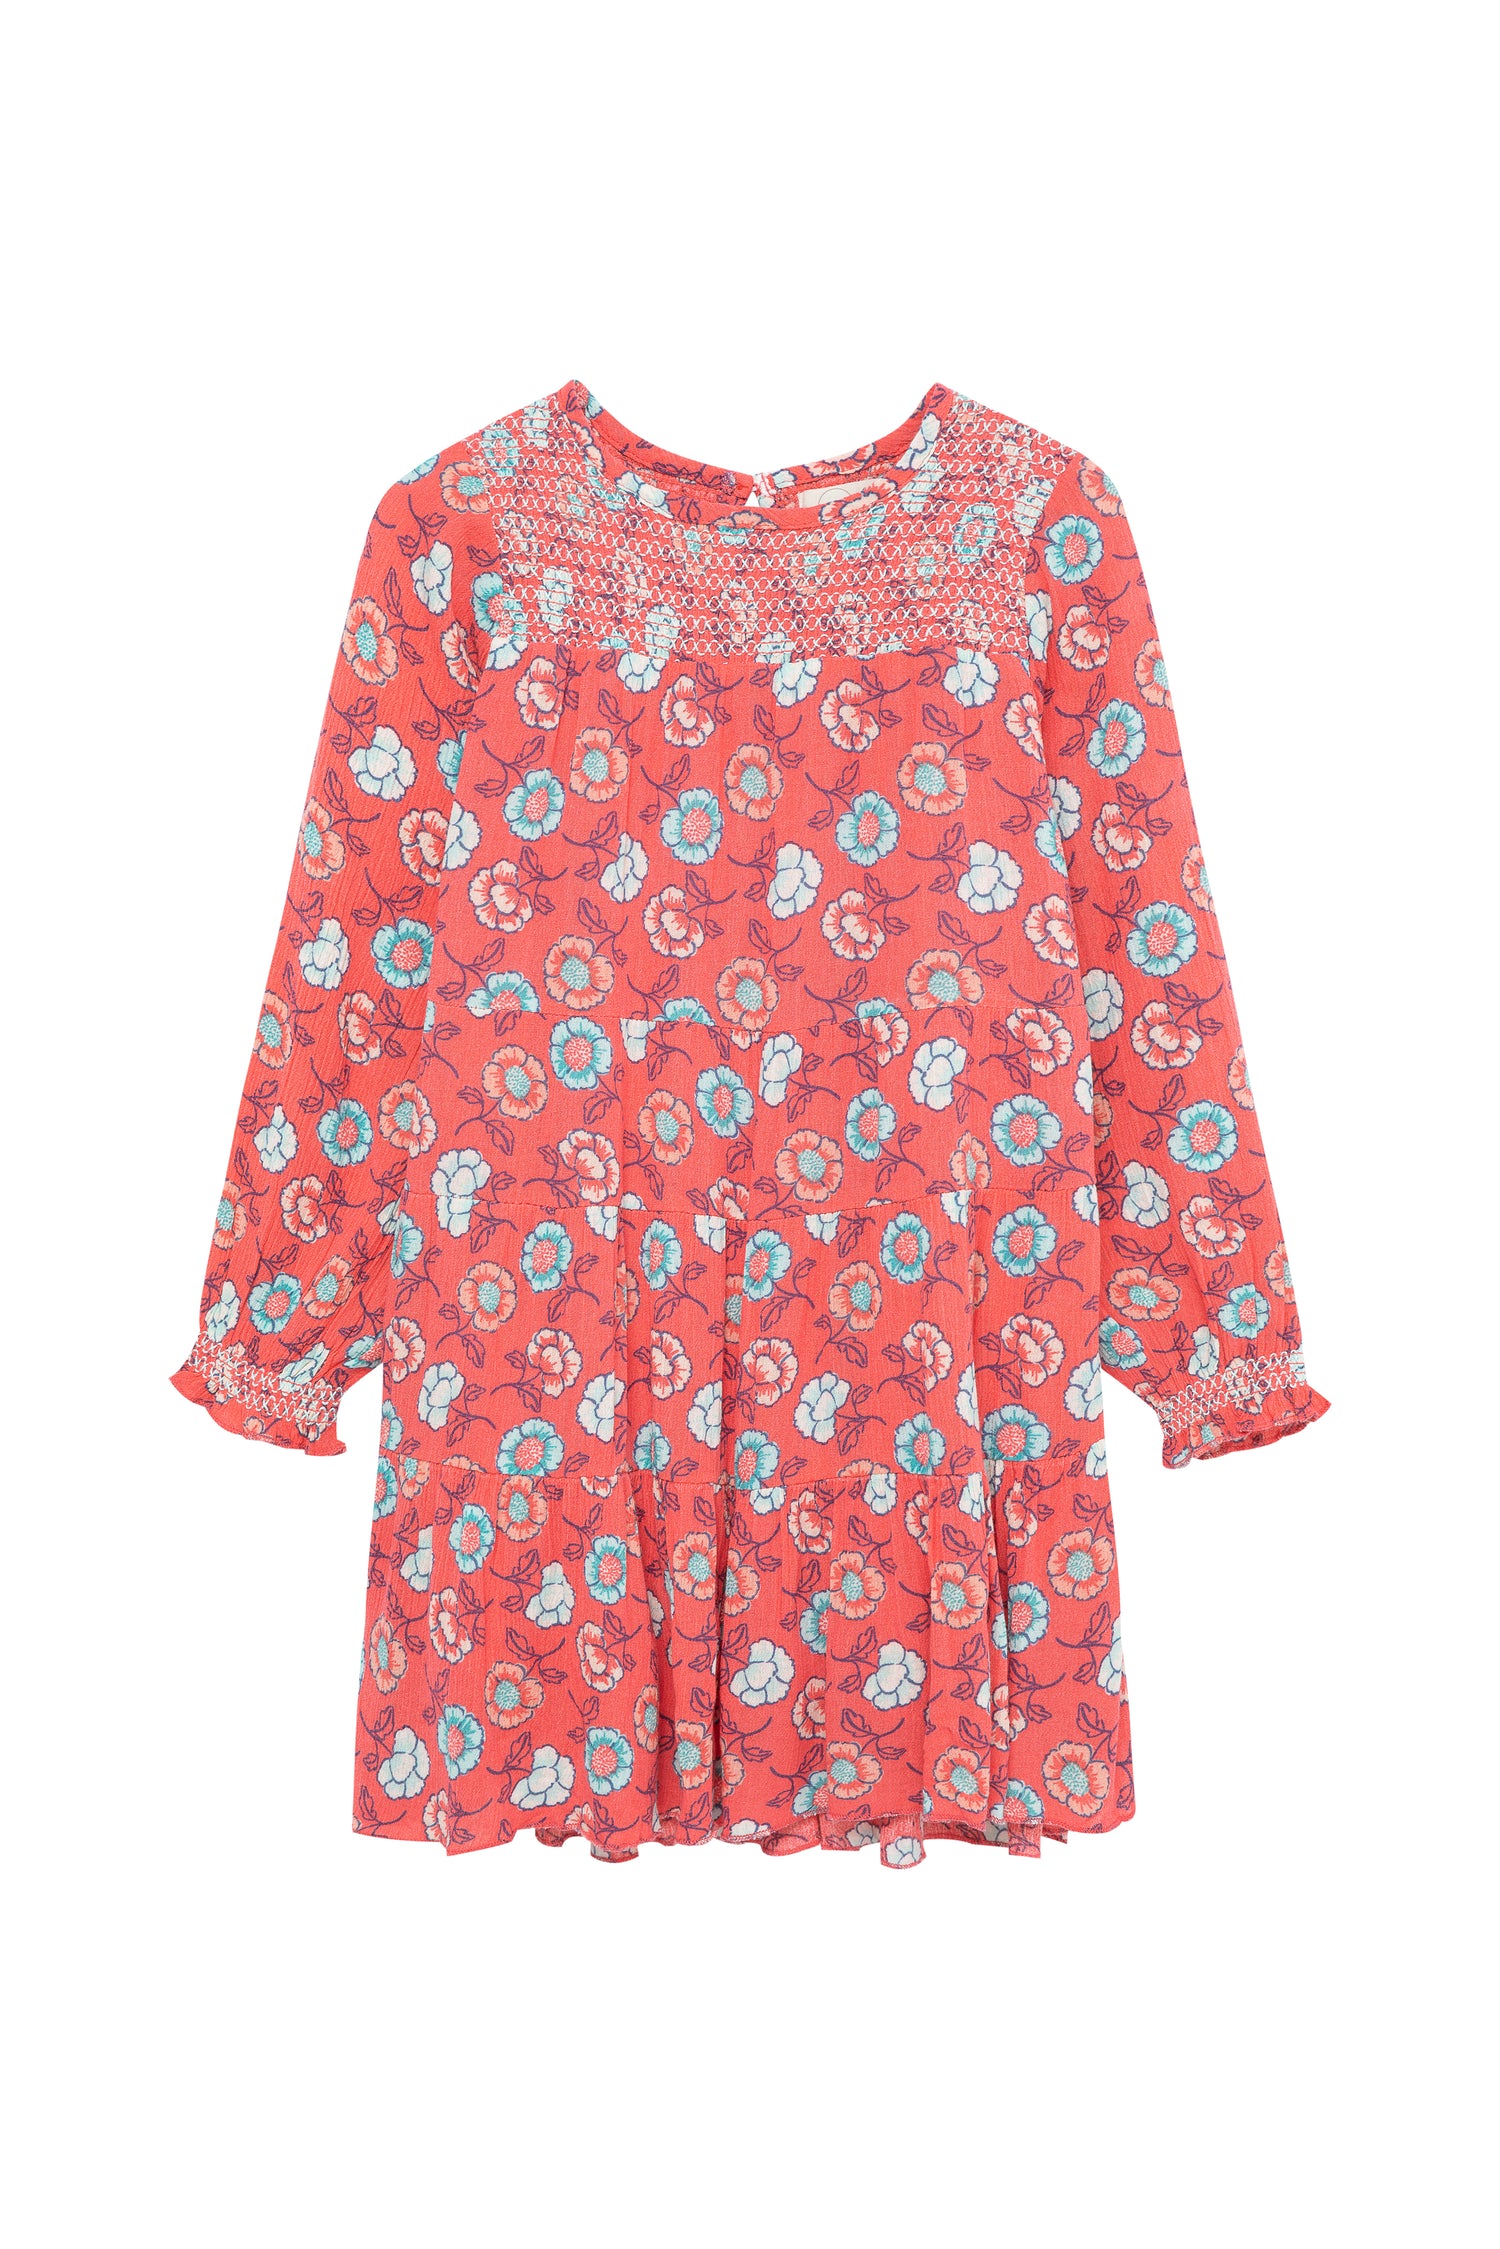 LONG SLEEVE DRESS FEATURING A SMOCKED UPPER BODICE AND AN ALL-OVER FLORAL PRINT